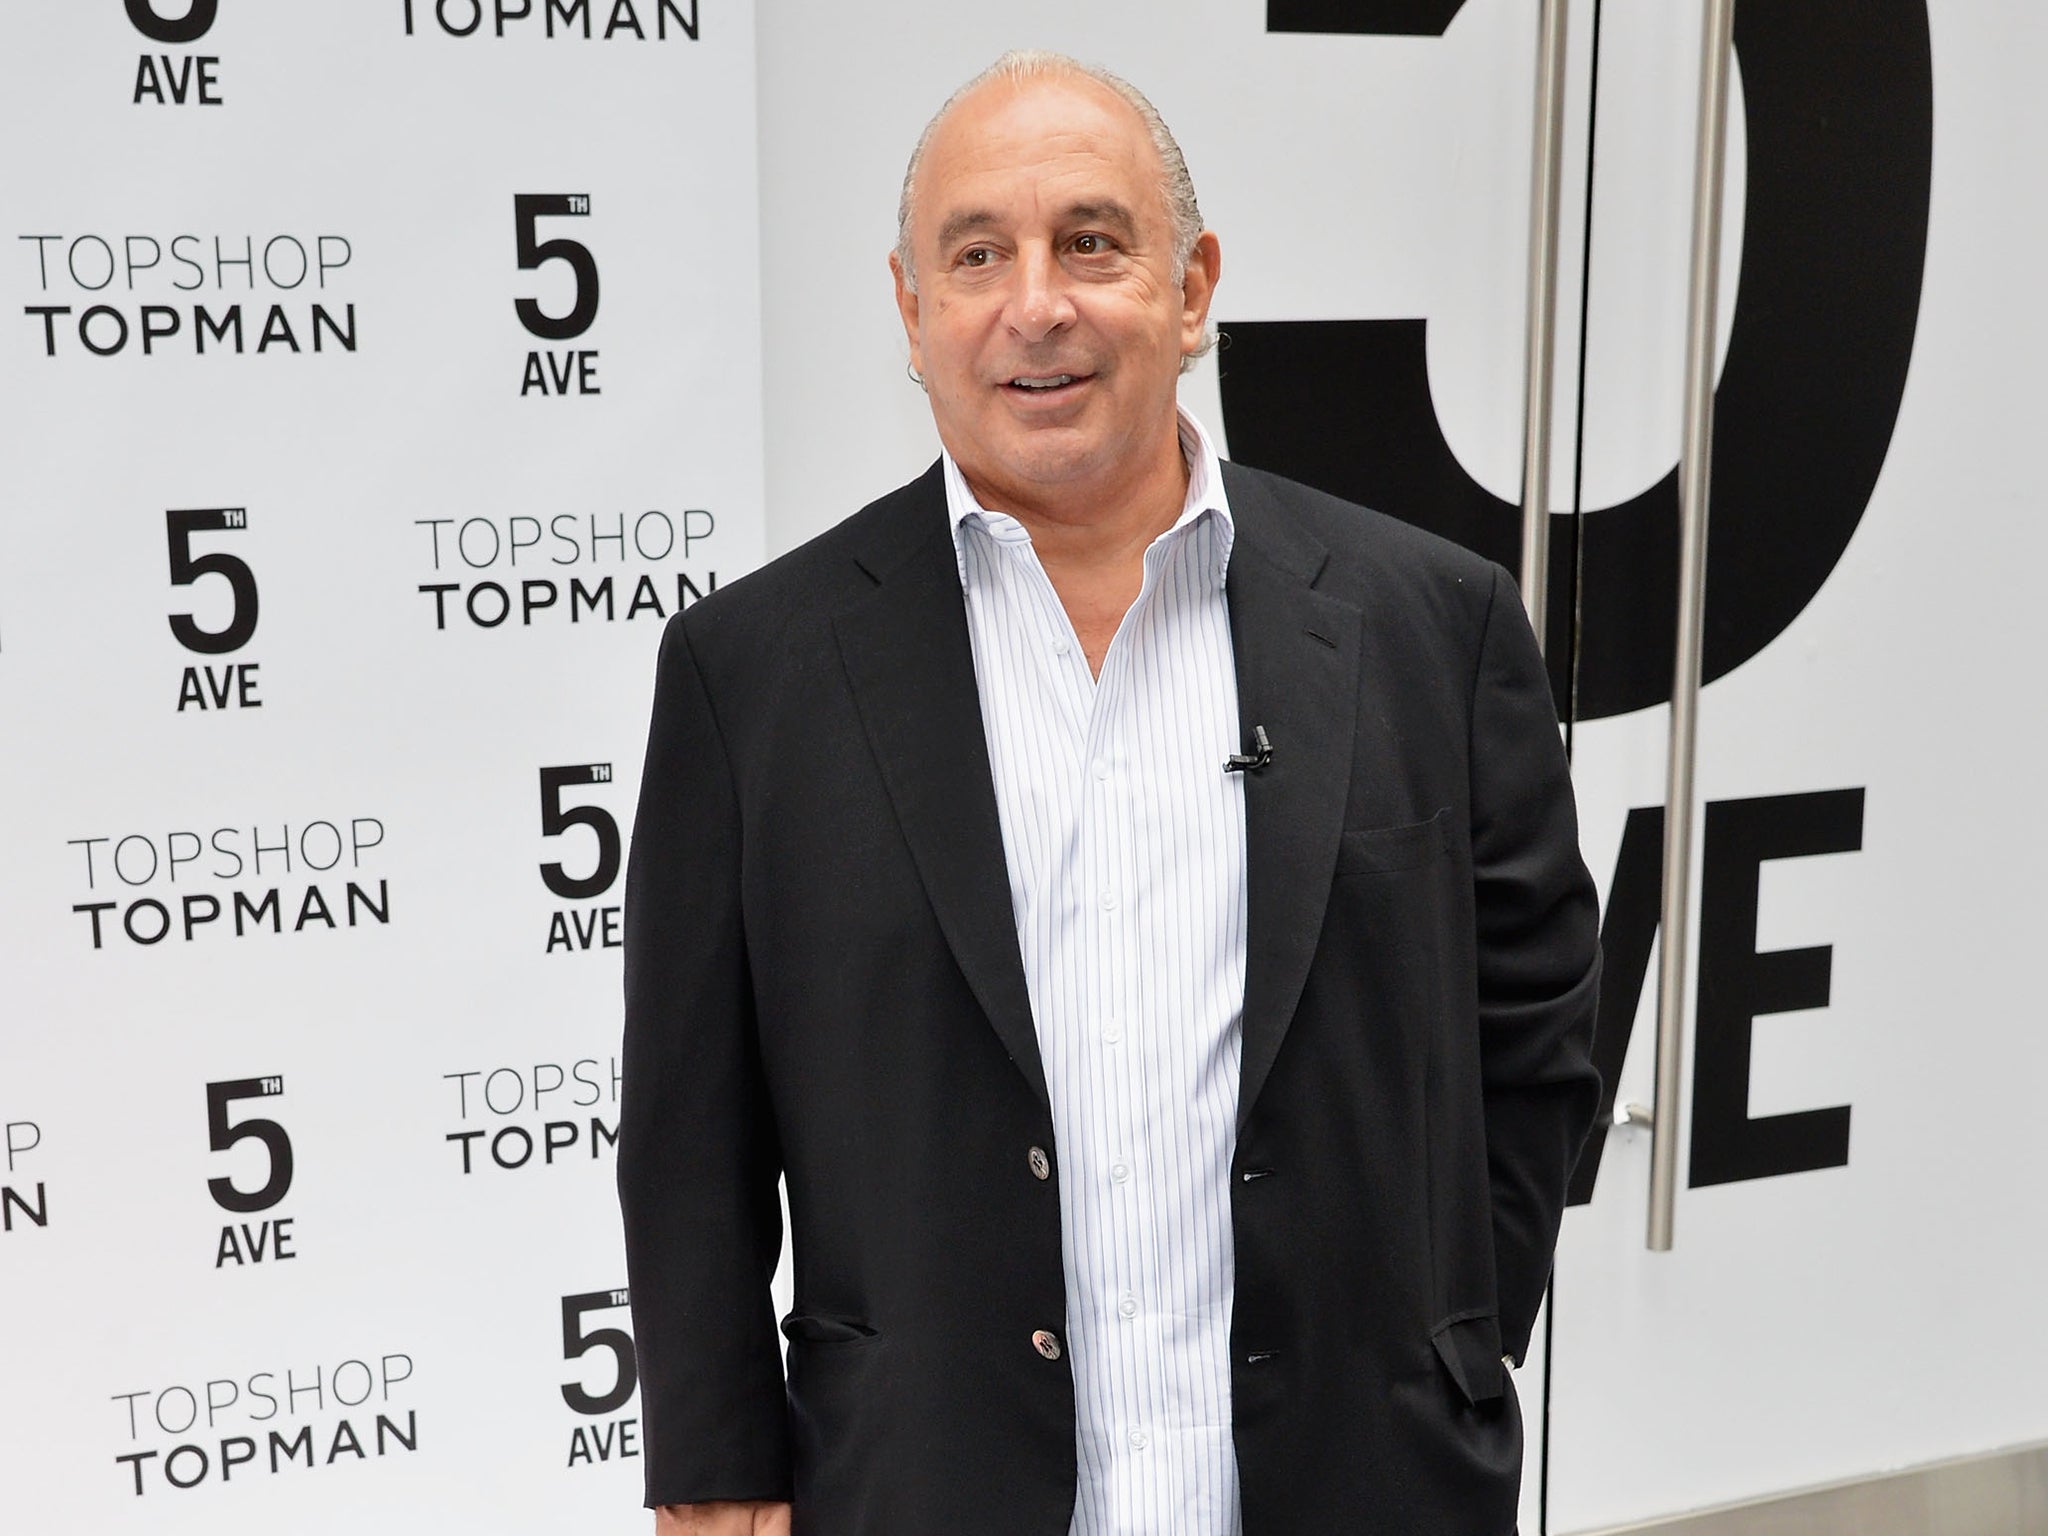 Sir Philip Green attends the Topshop Topman New York City flagship grand opening at Topshop Topman Flagship Store